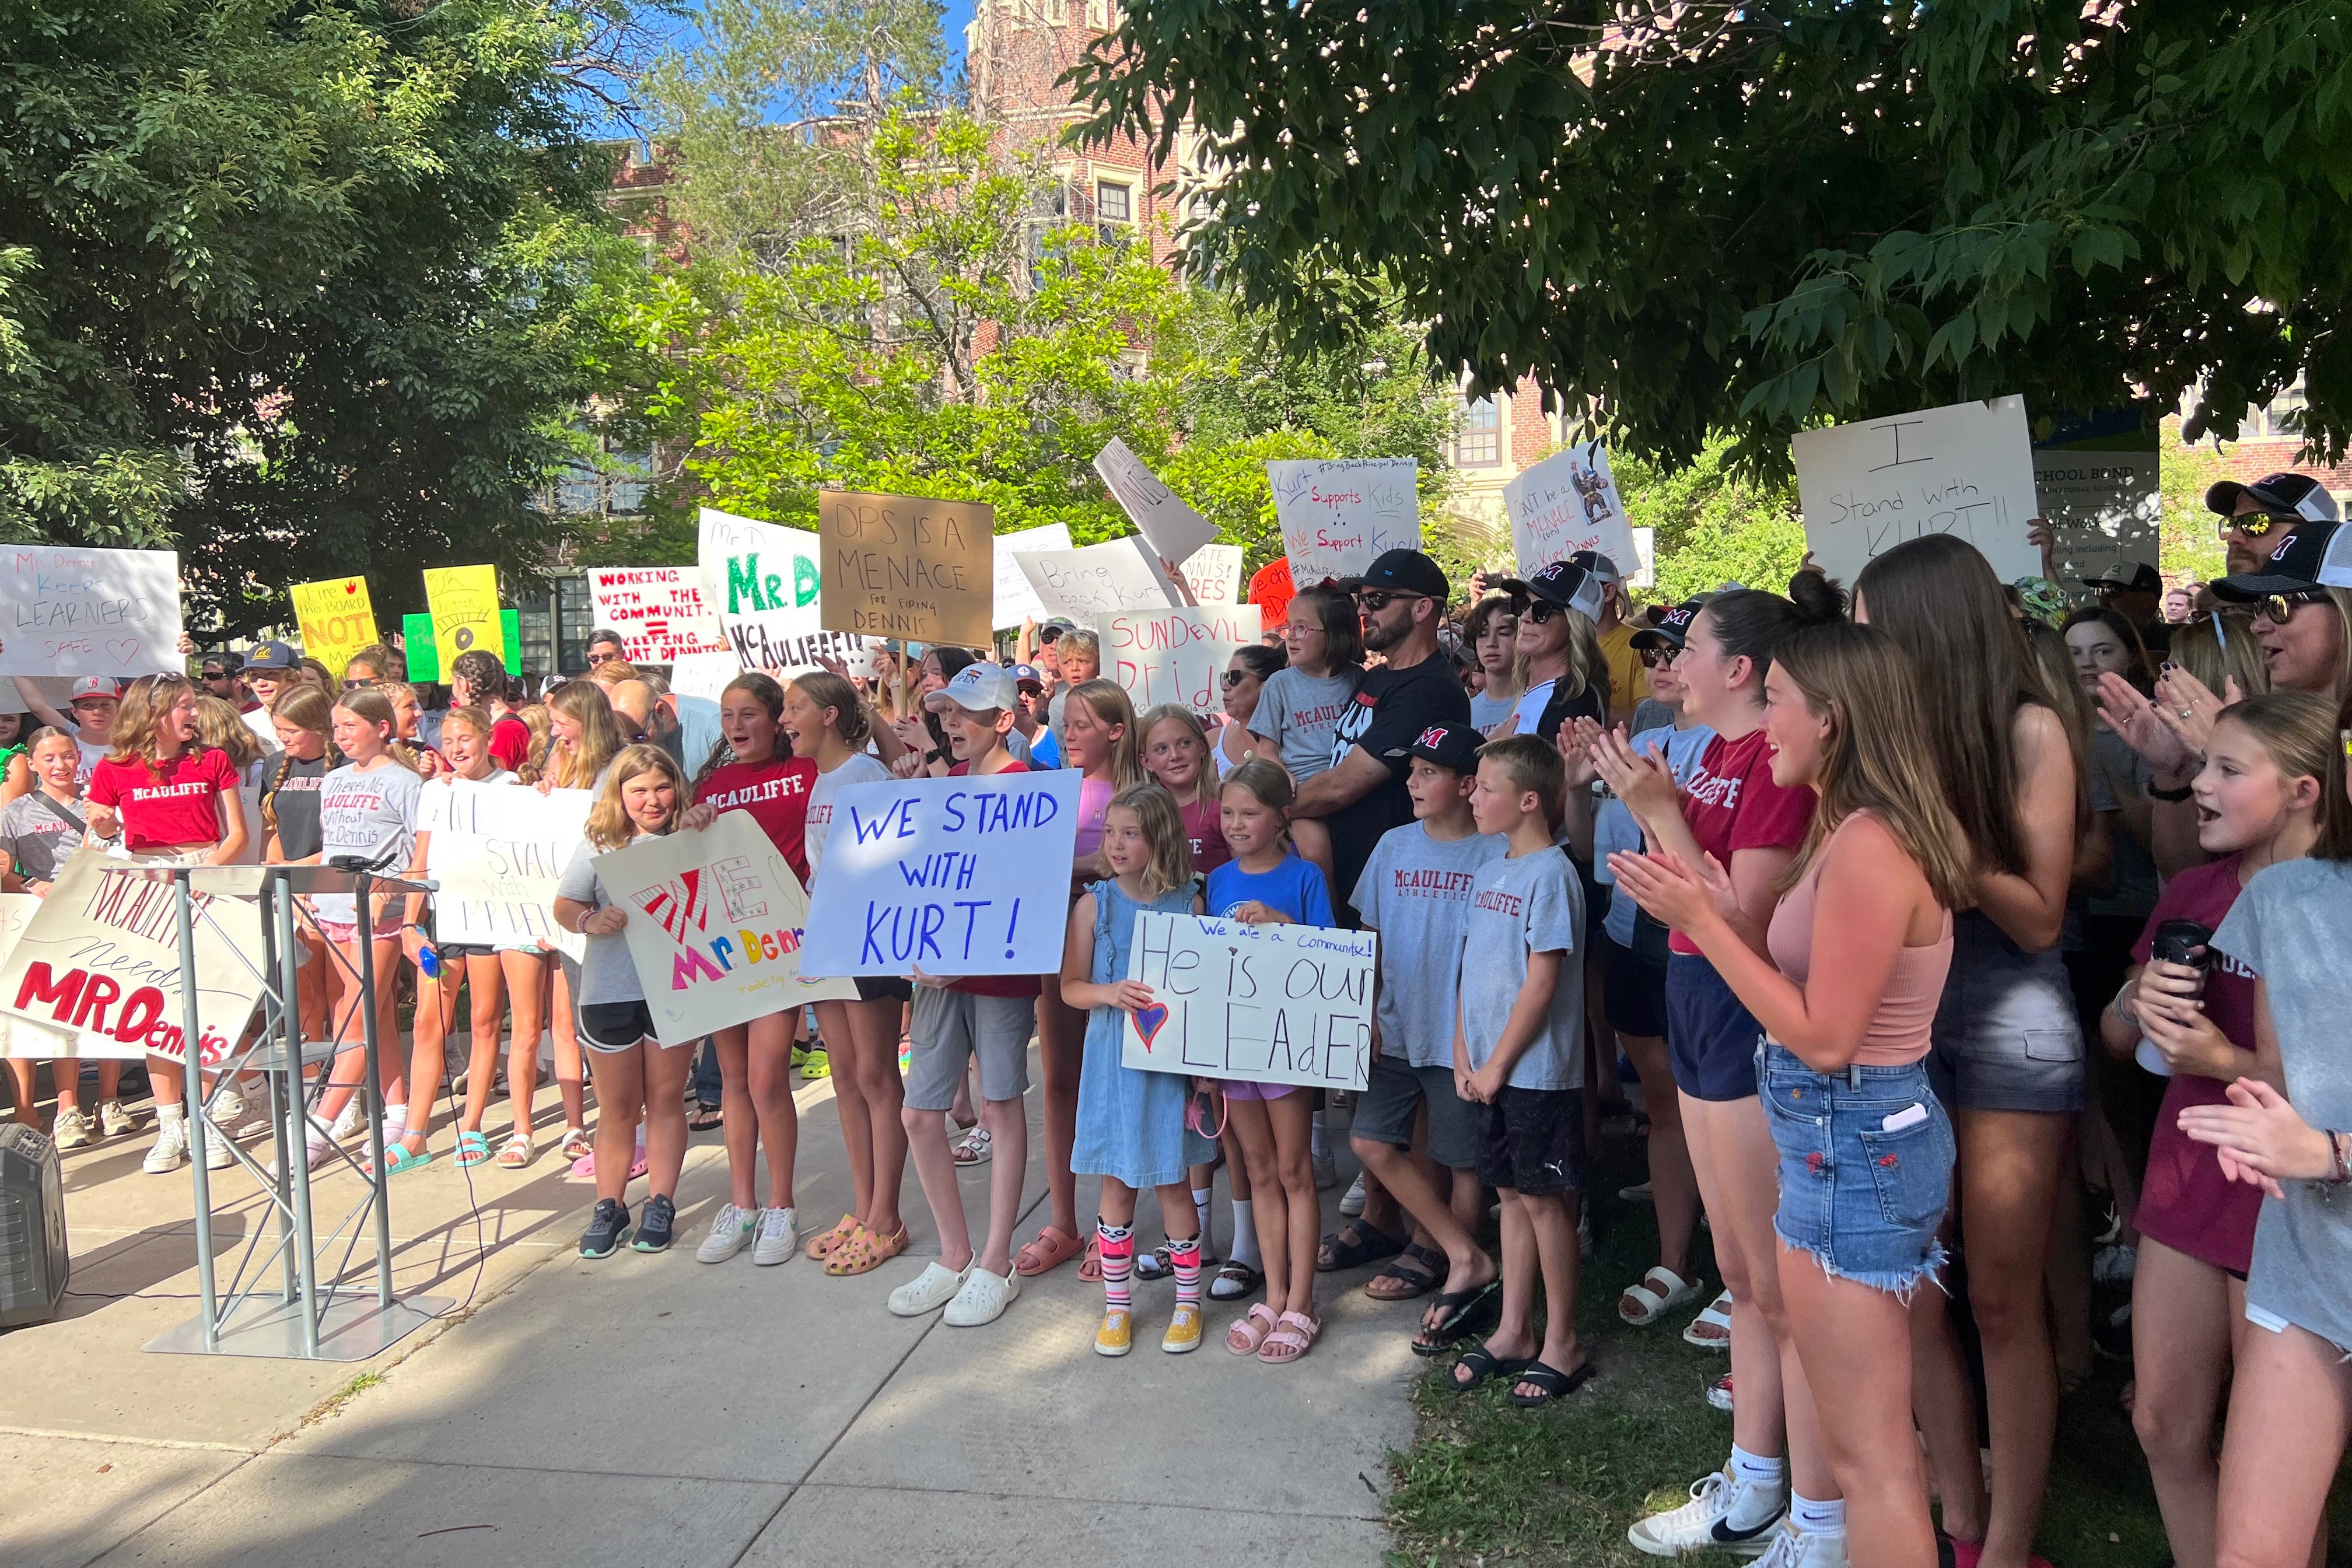 A group of people stand outside a middle school holding homemade signs.